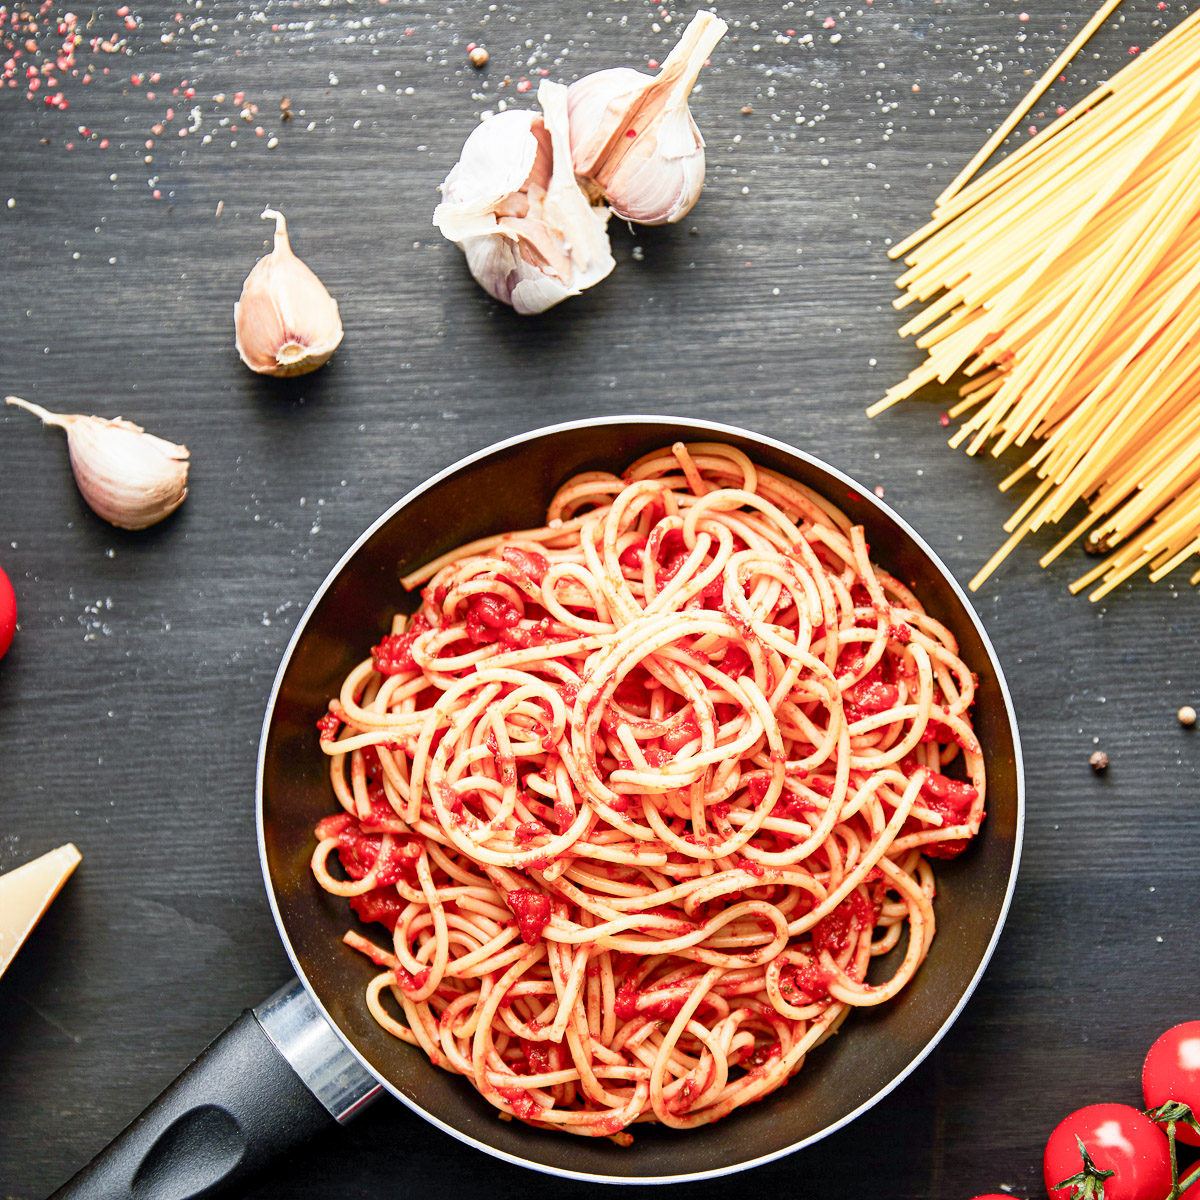 A pan of pasta with sauce, along with garlic, tomatoes and spaghettini on the table